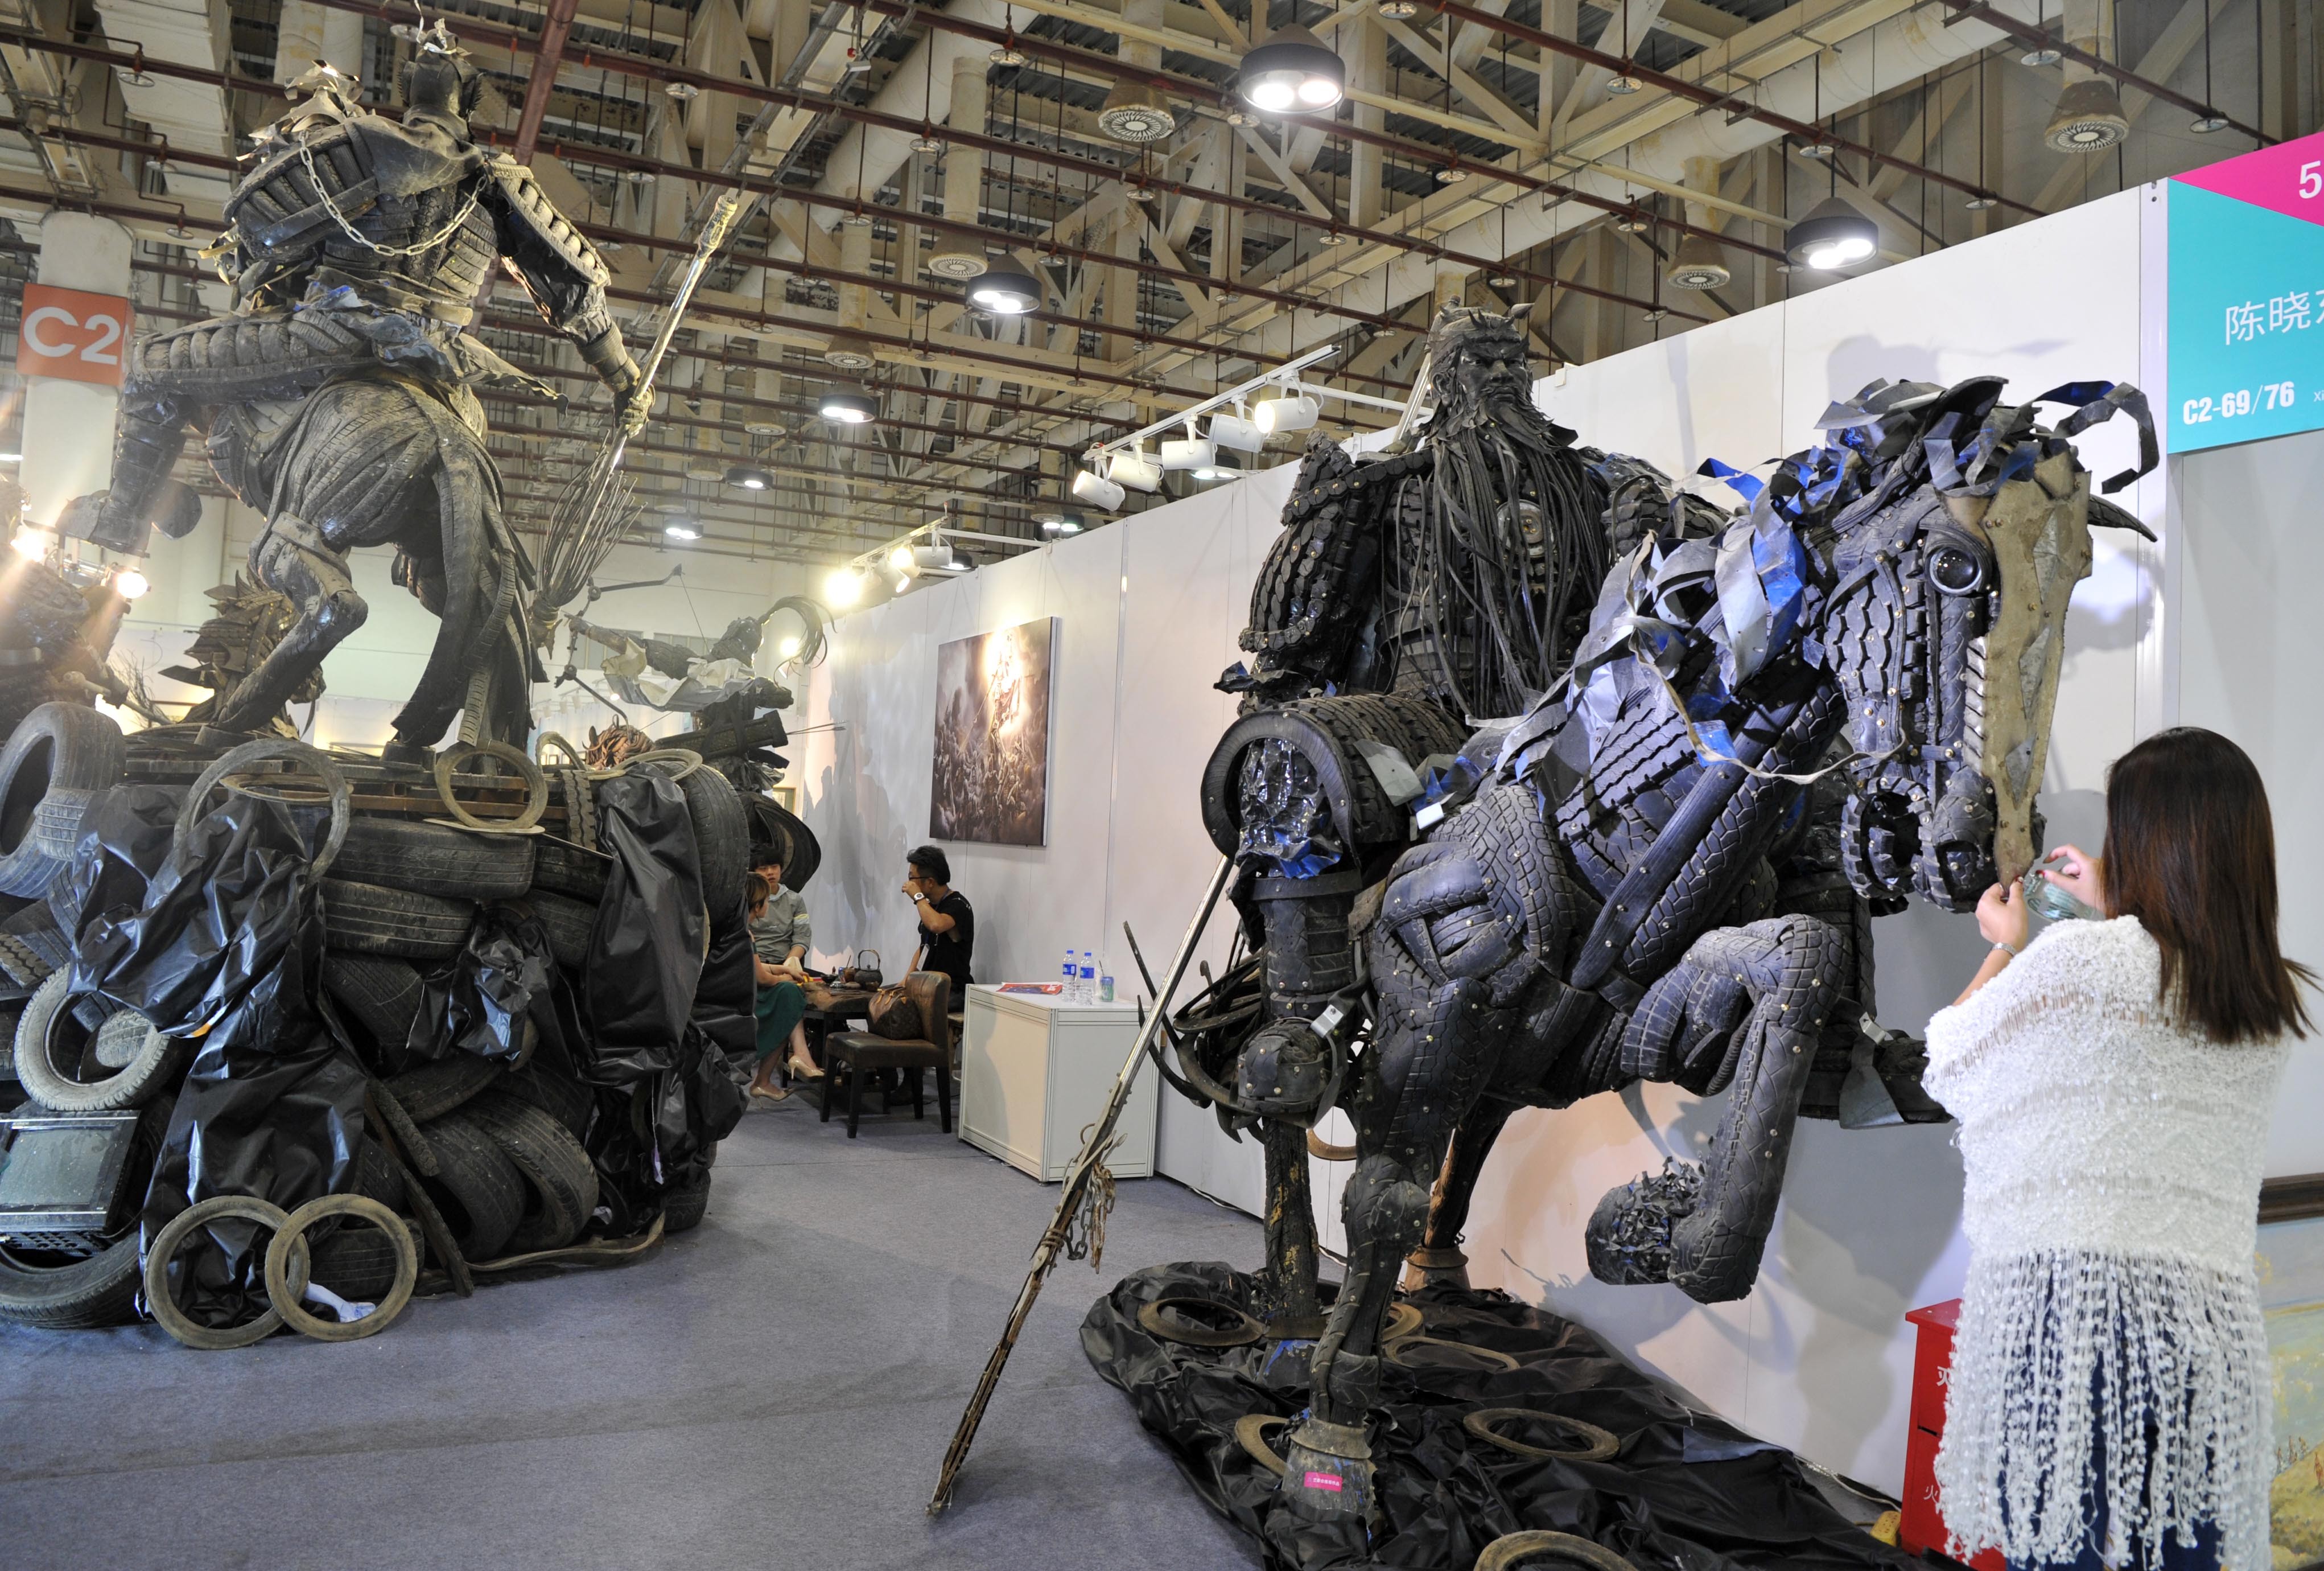 This year’s Art Amoy Art Fair featured 10,000 artworks by 1,000 Chinese and international artists.